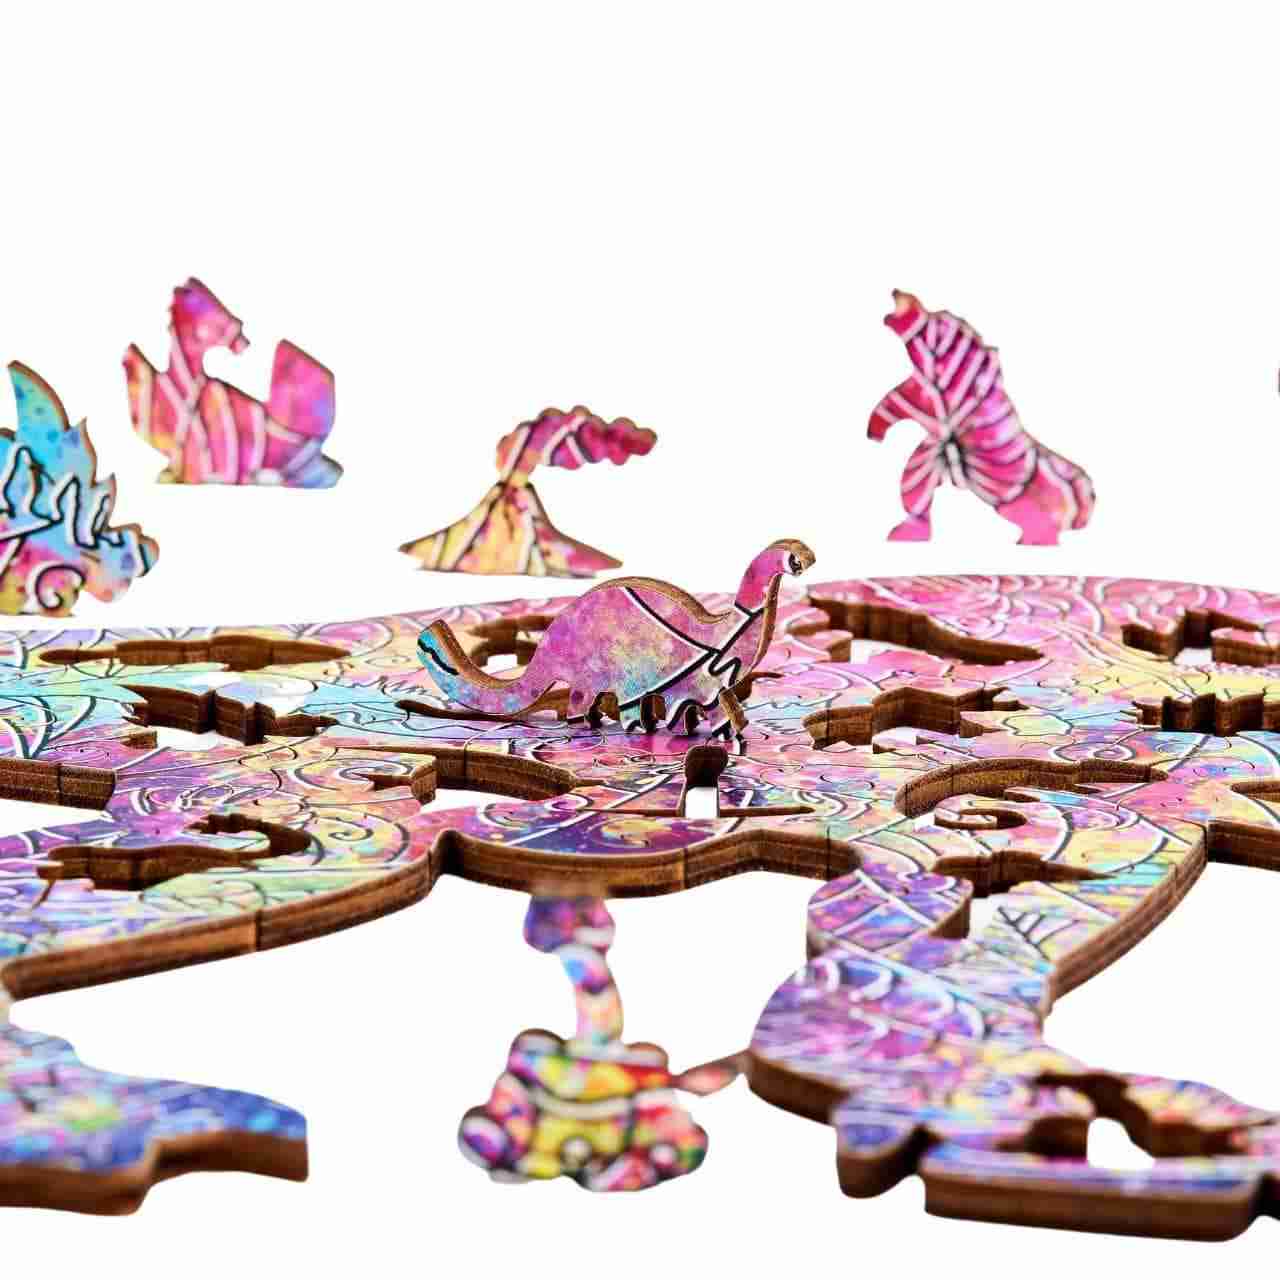 Dinosaur Jigsaw Puzzle for children detailed view